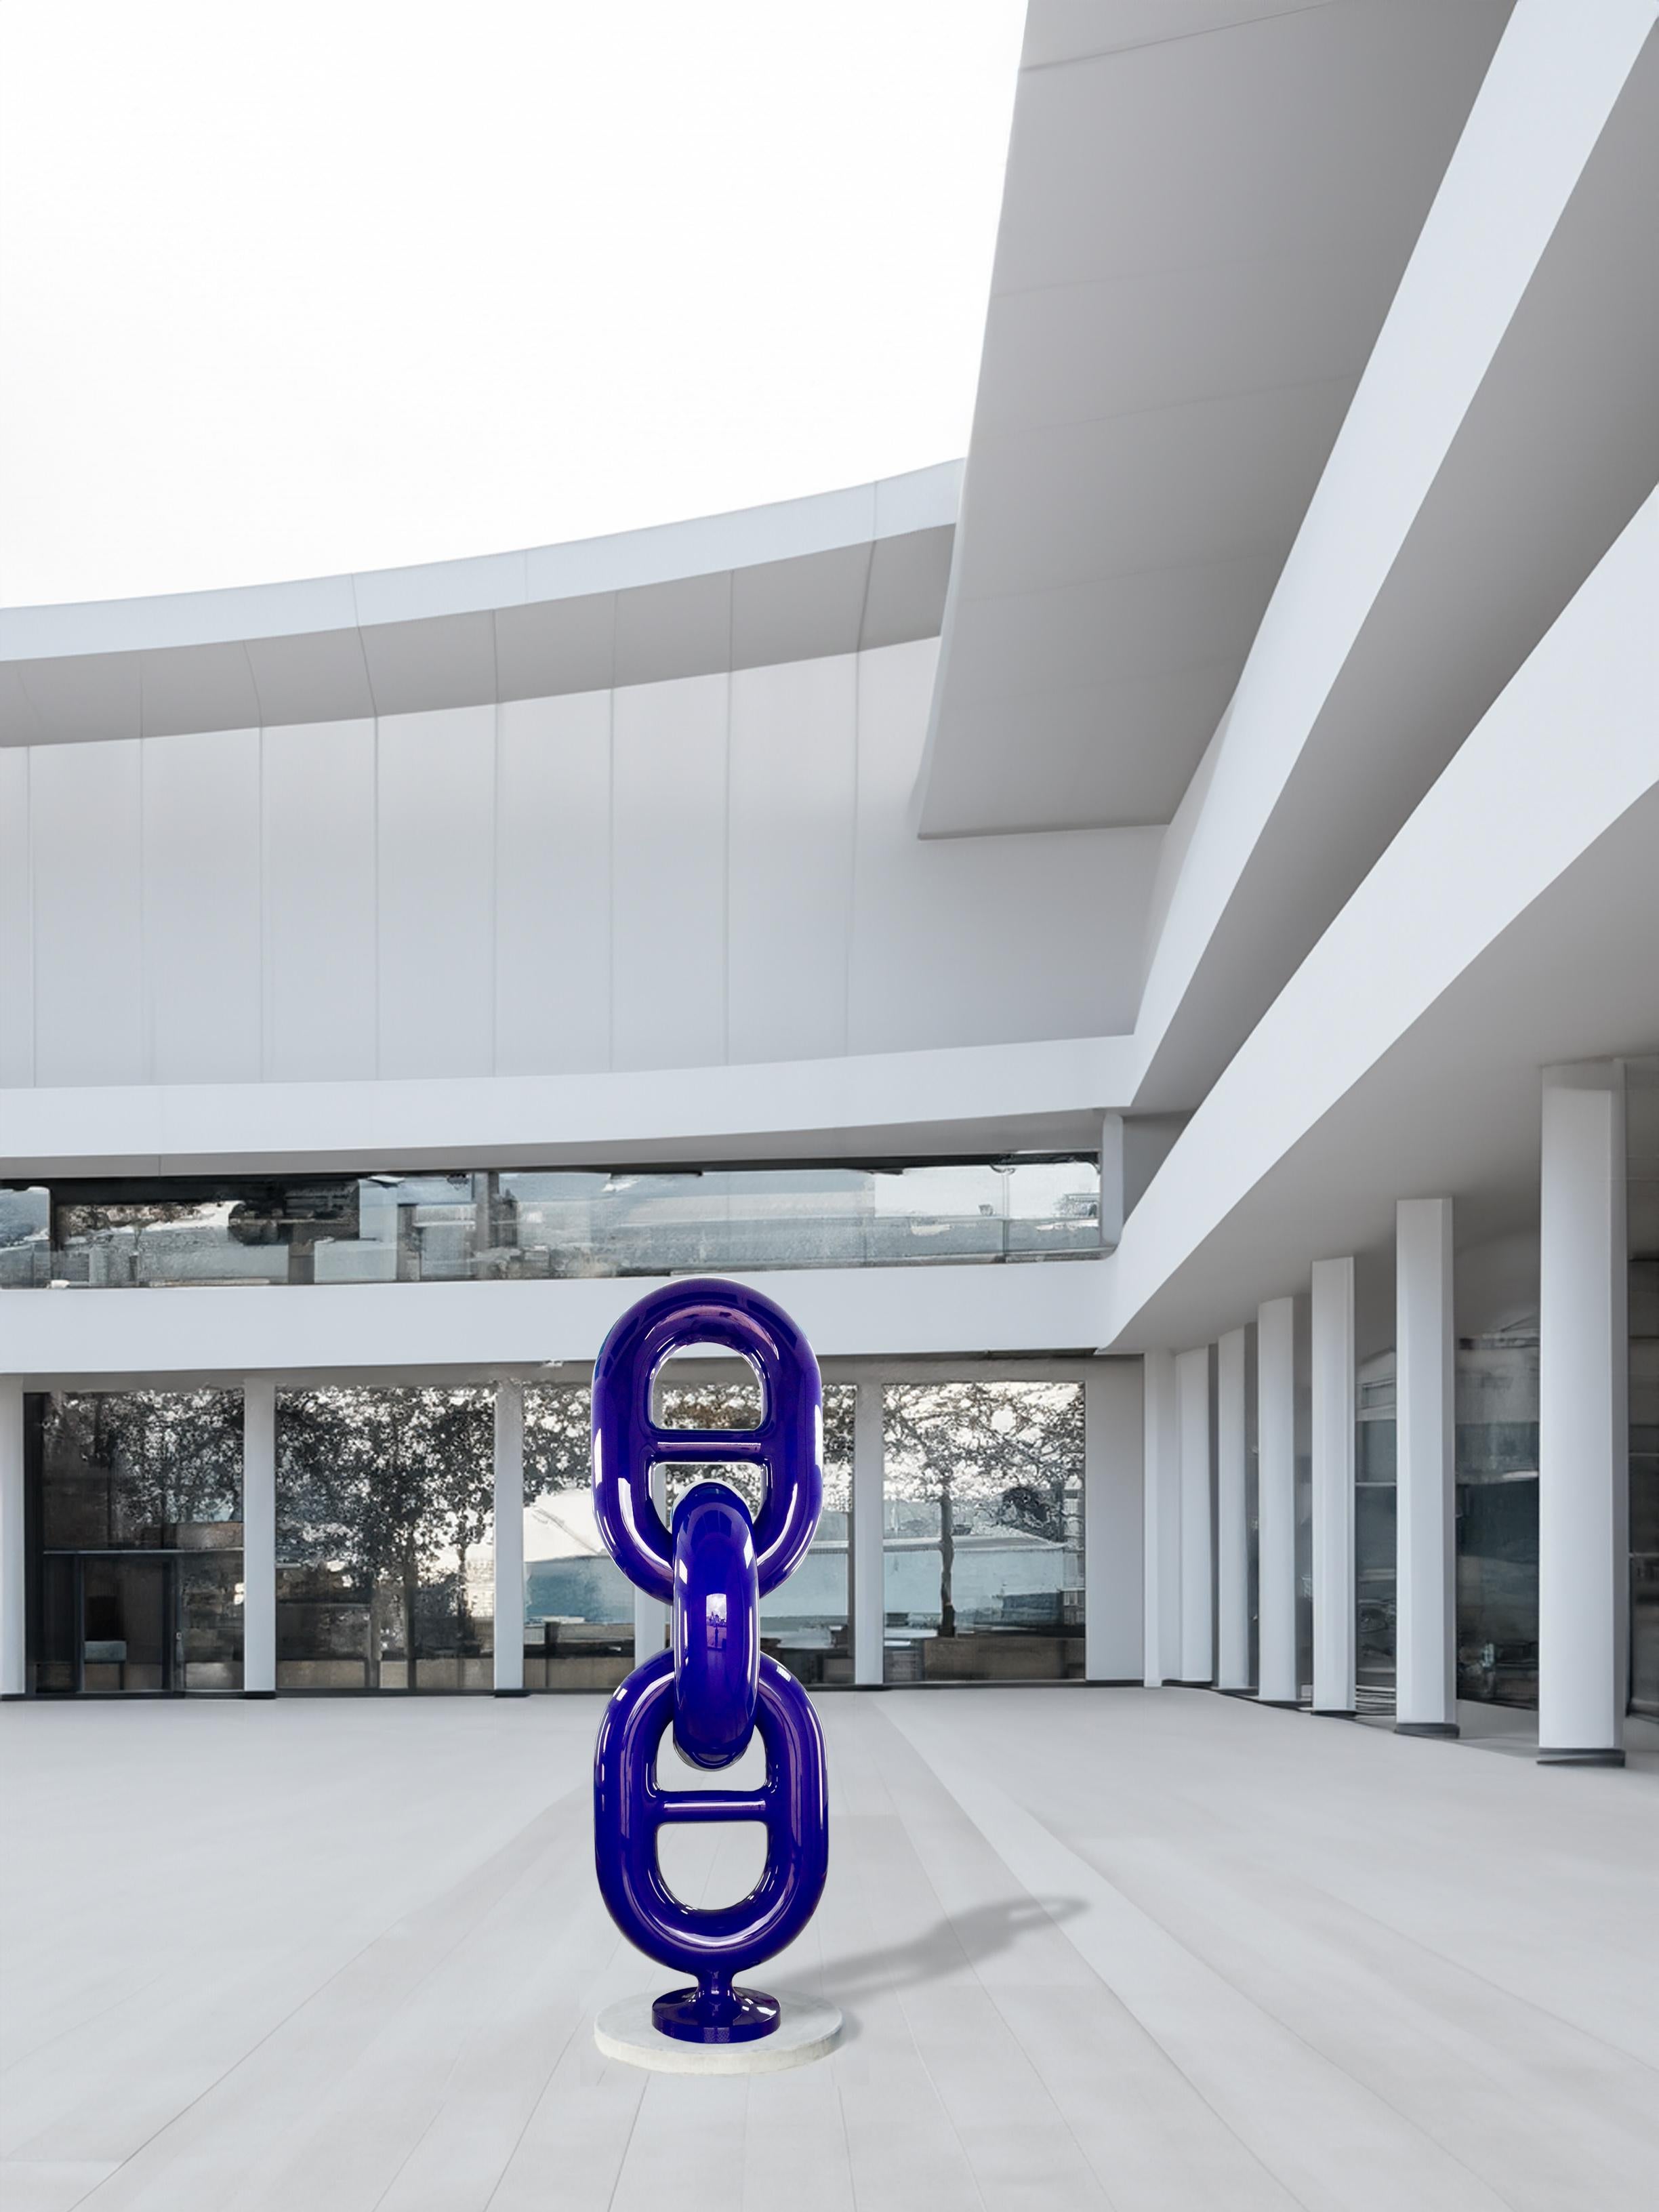 Blue Chain - polished, abstract, painted stainless steel, outdoor sculpture - Abstract Sculpture by Alexander Caldwell